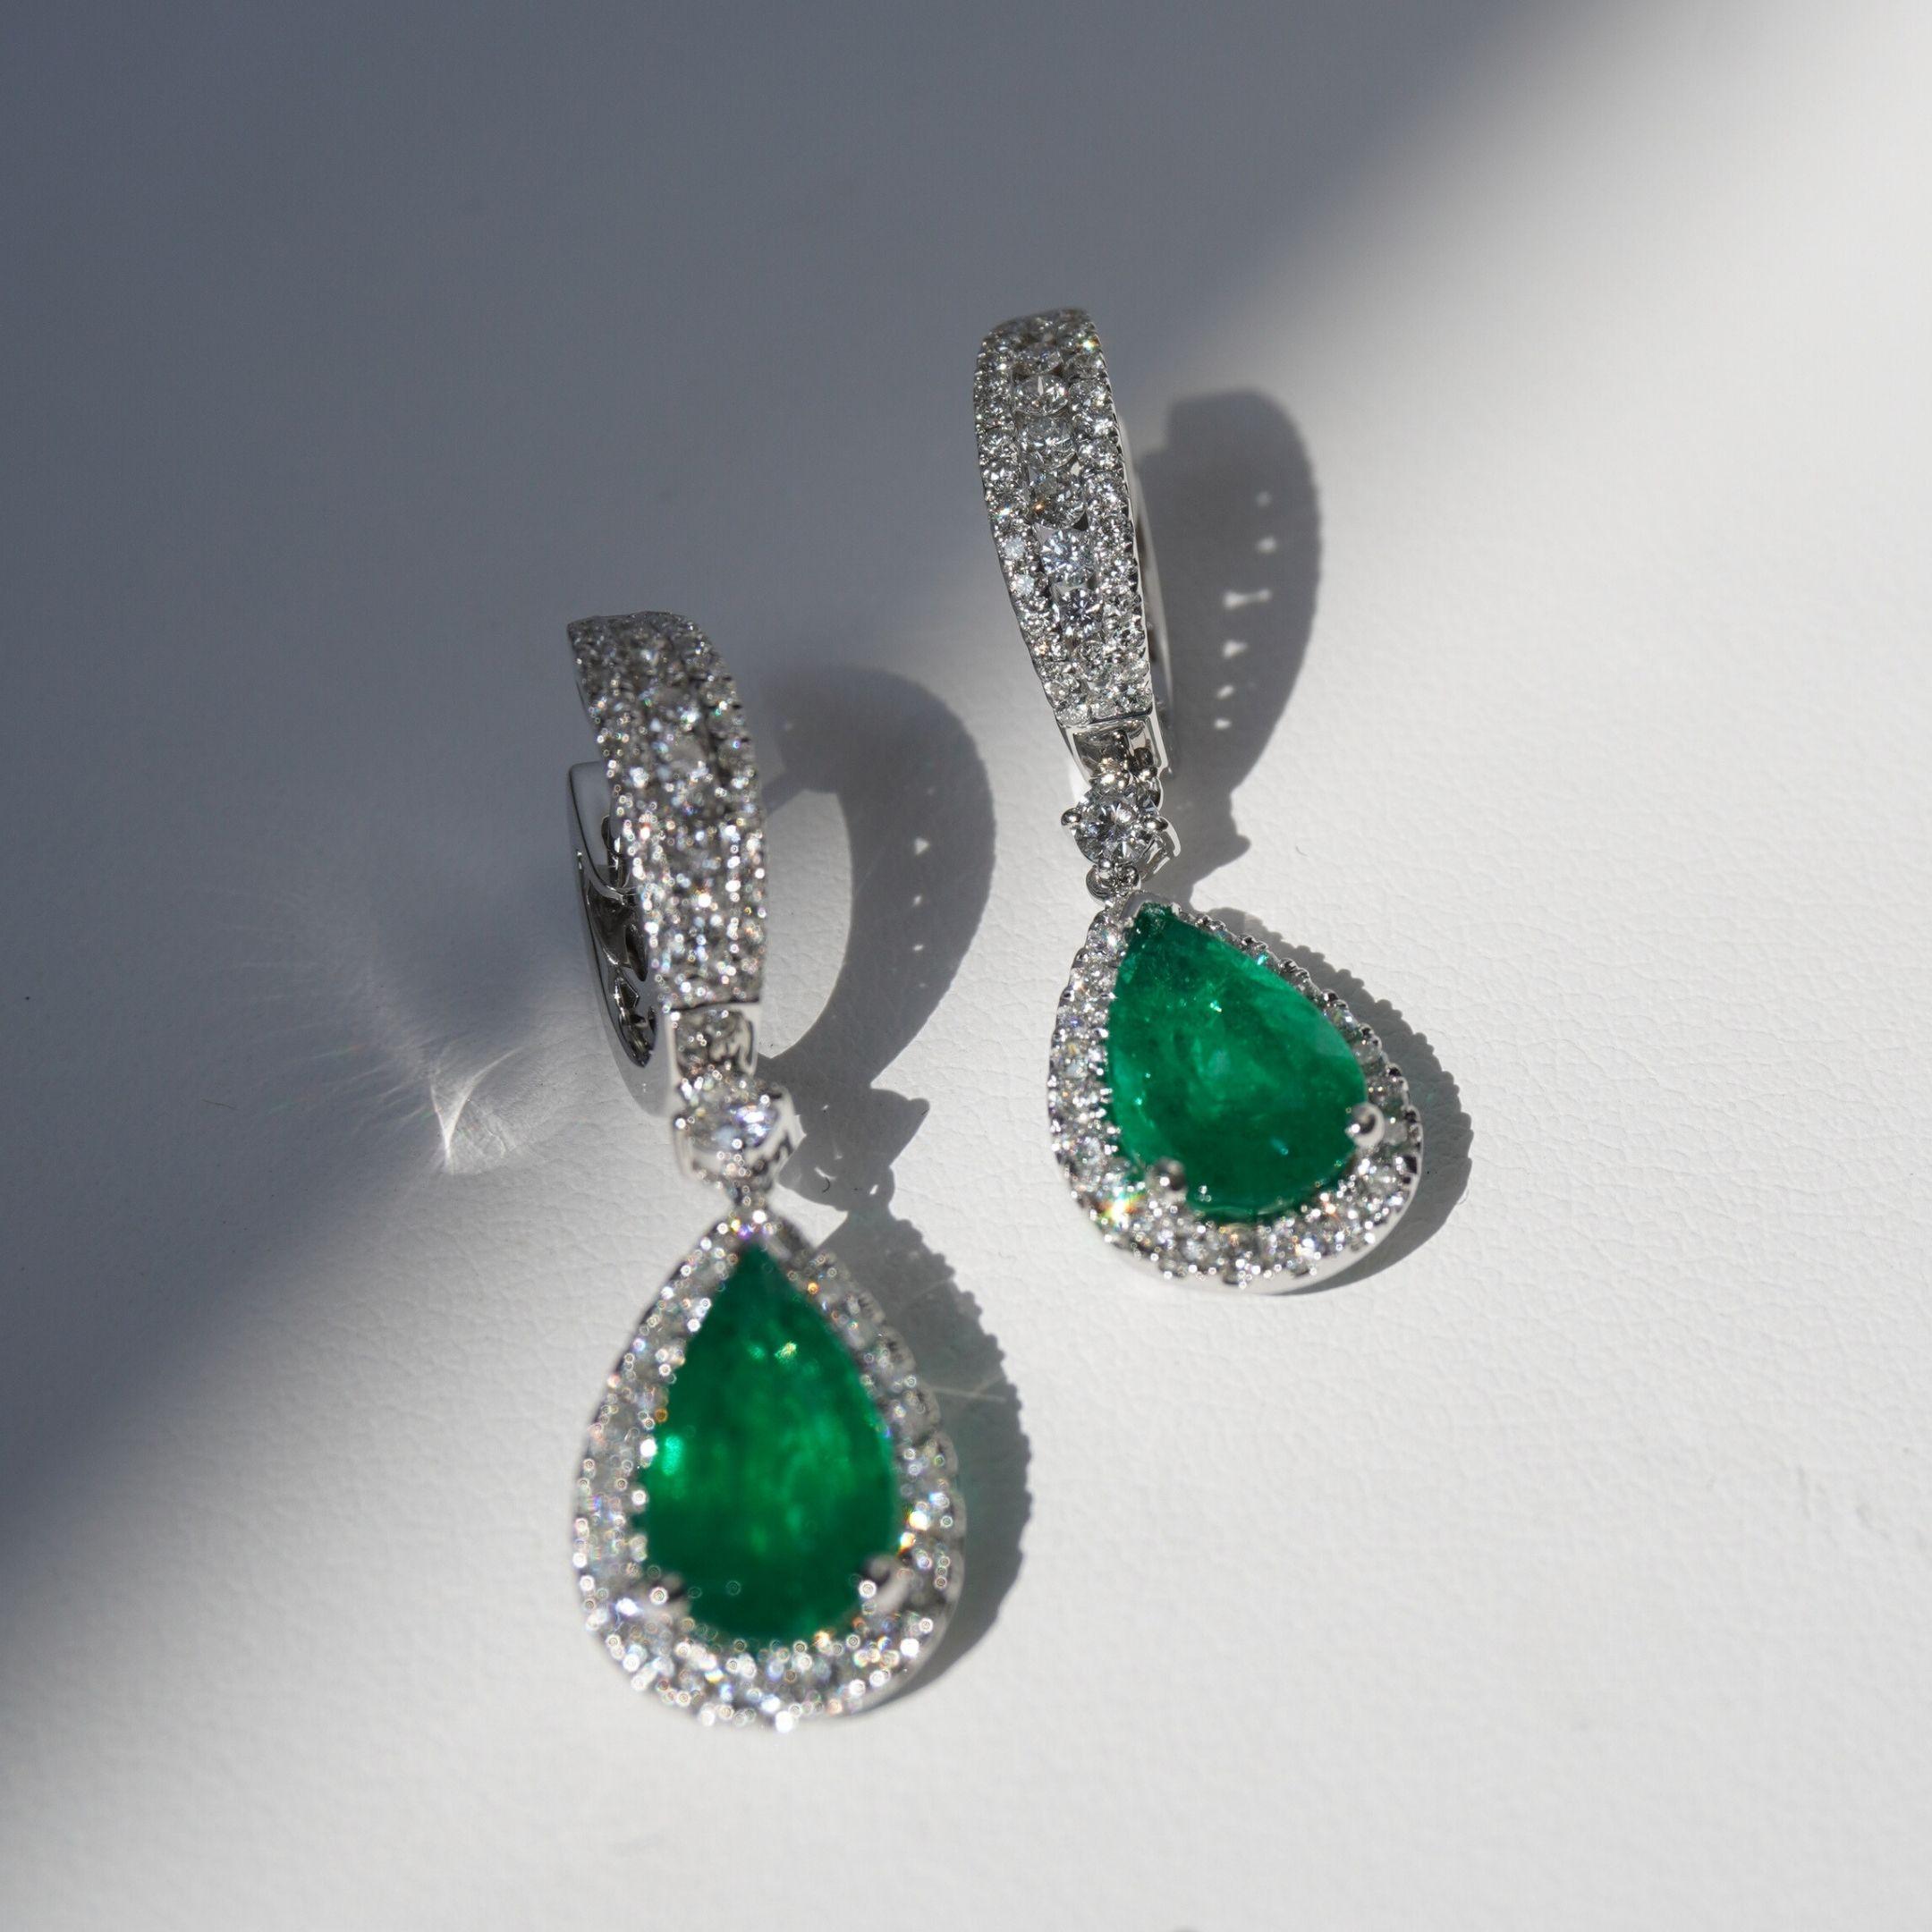 Emerald Weight: 3.09 CT
Measurements: 10 x 6.5 mm
Diamond Weight: 0.95 CT
Metal: 18K White Gold
Gold Weight: 5.44 gm
Shape: Pear
Color: Intense Green
Hardness: 7.5-8
Birthstone: May